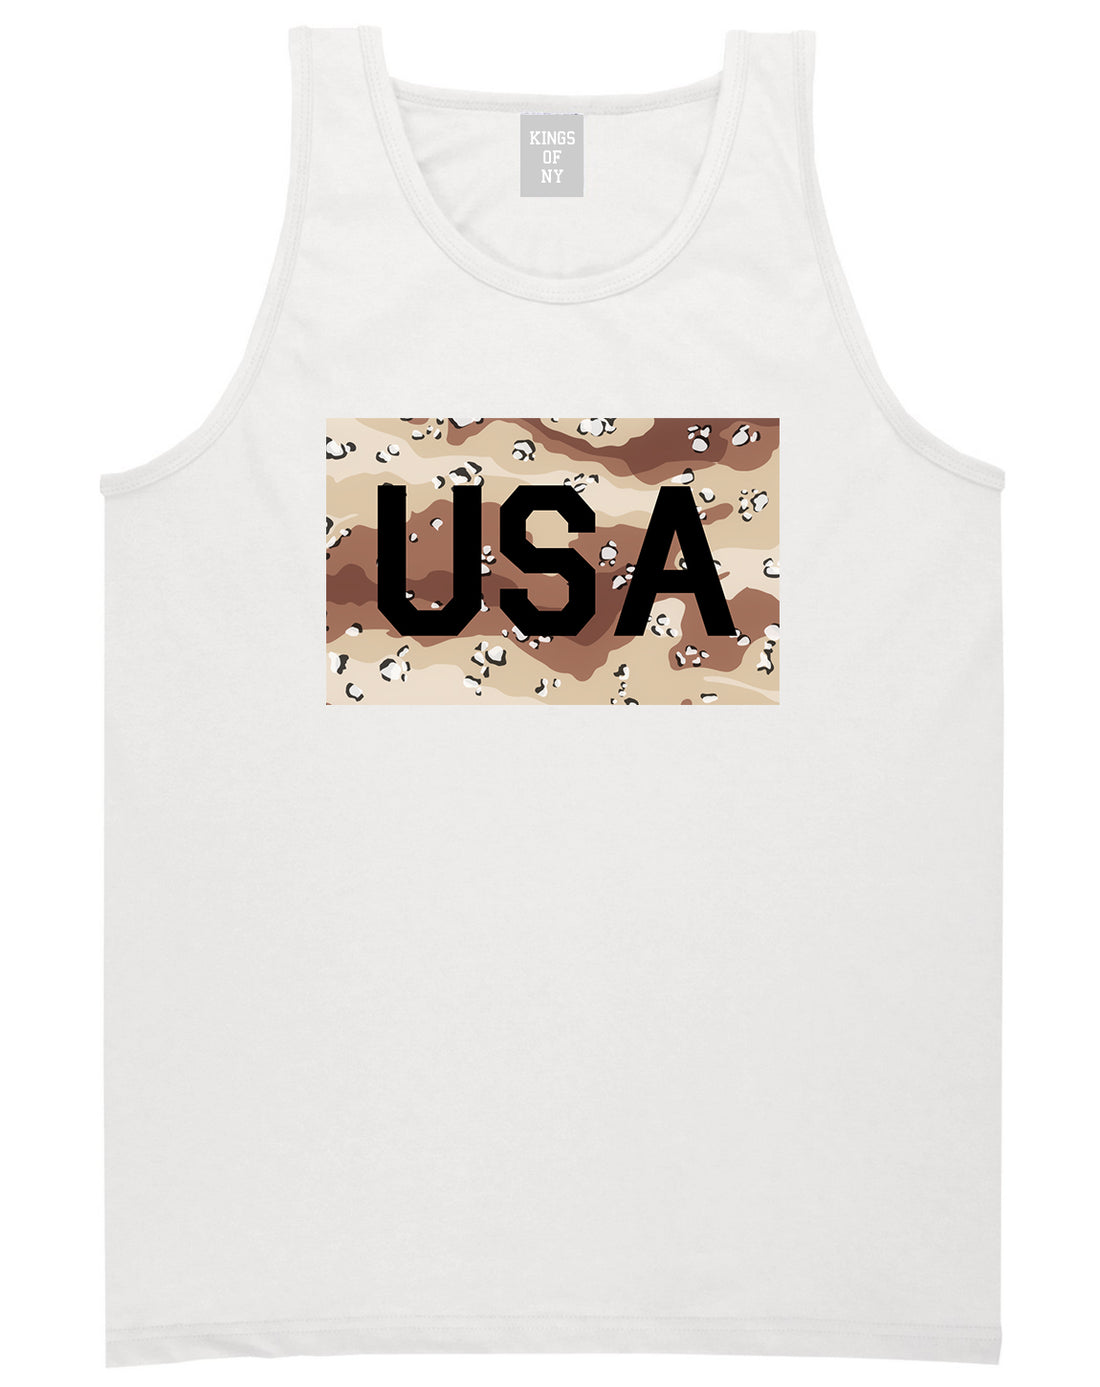 USA_Desert_Camo_Army Mens White Tank Top Shirt by Kings Of NY